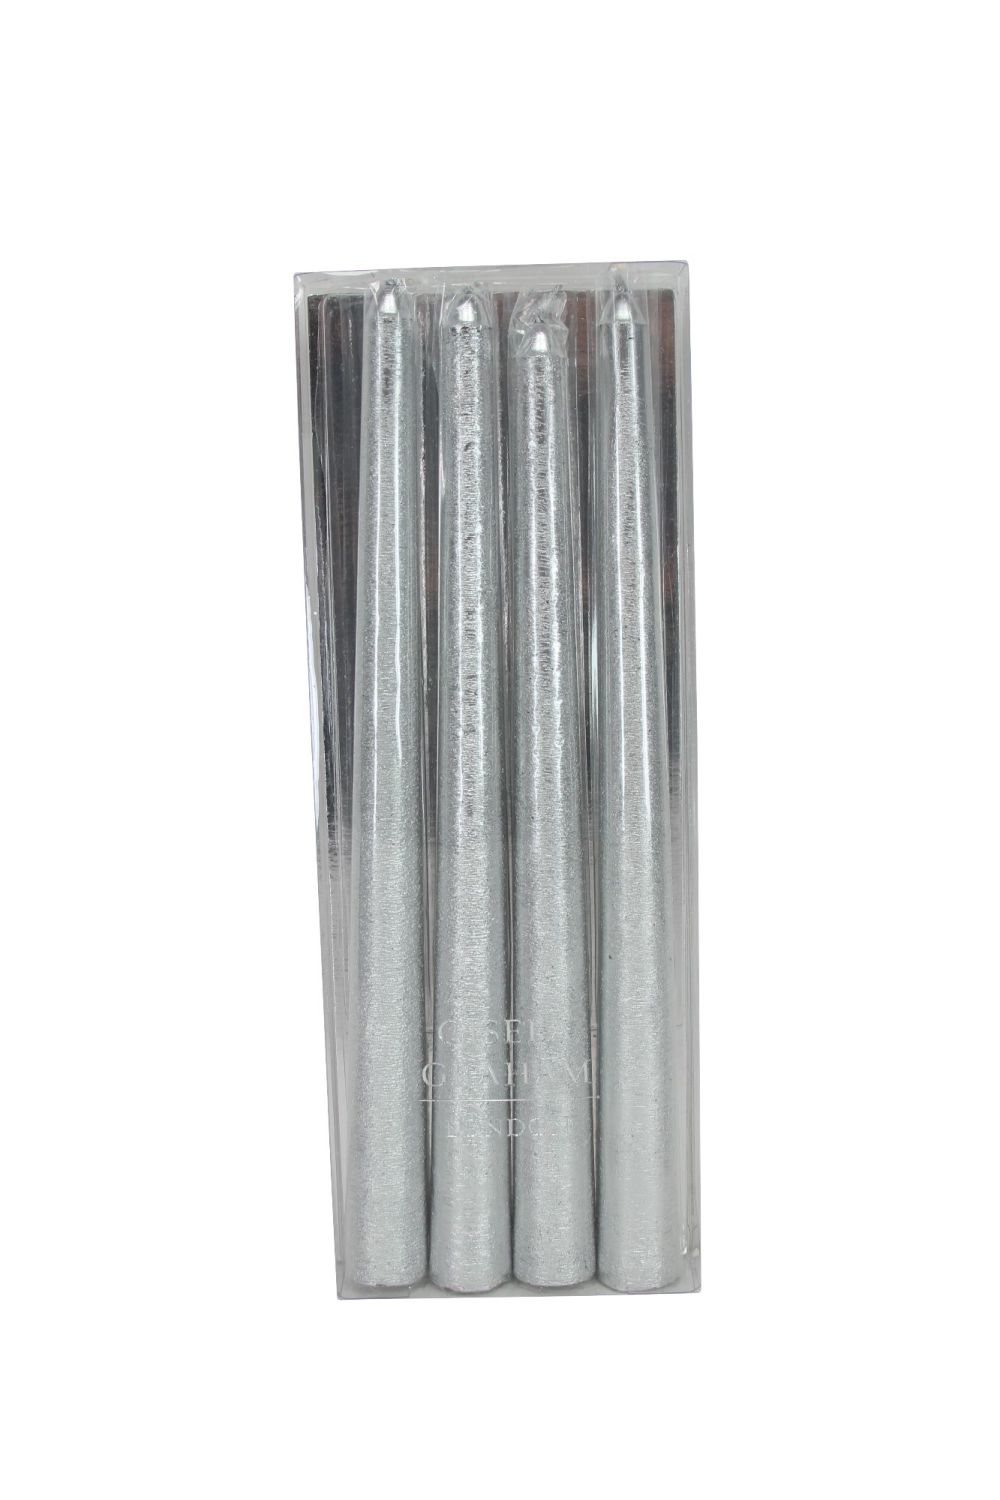 Gisela Graham Silver Dipped Wax Taper Candle - Box of 4